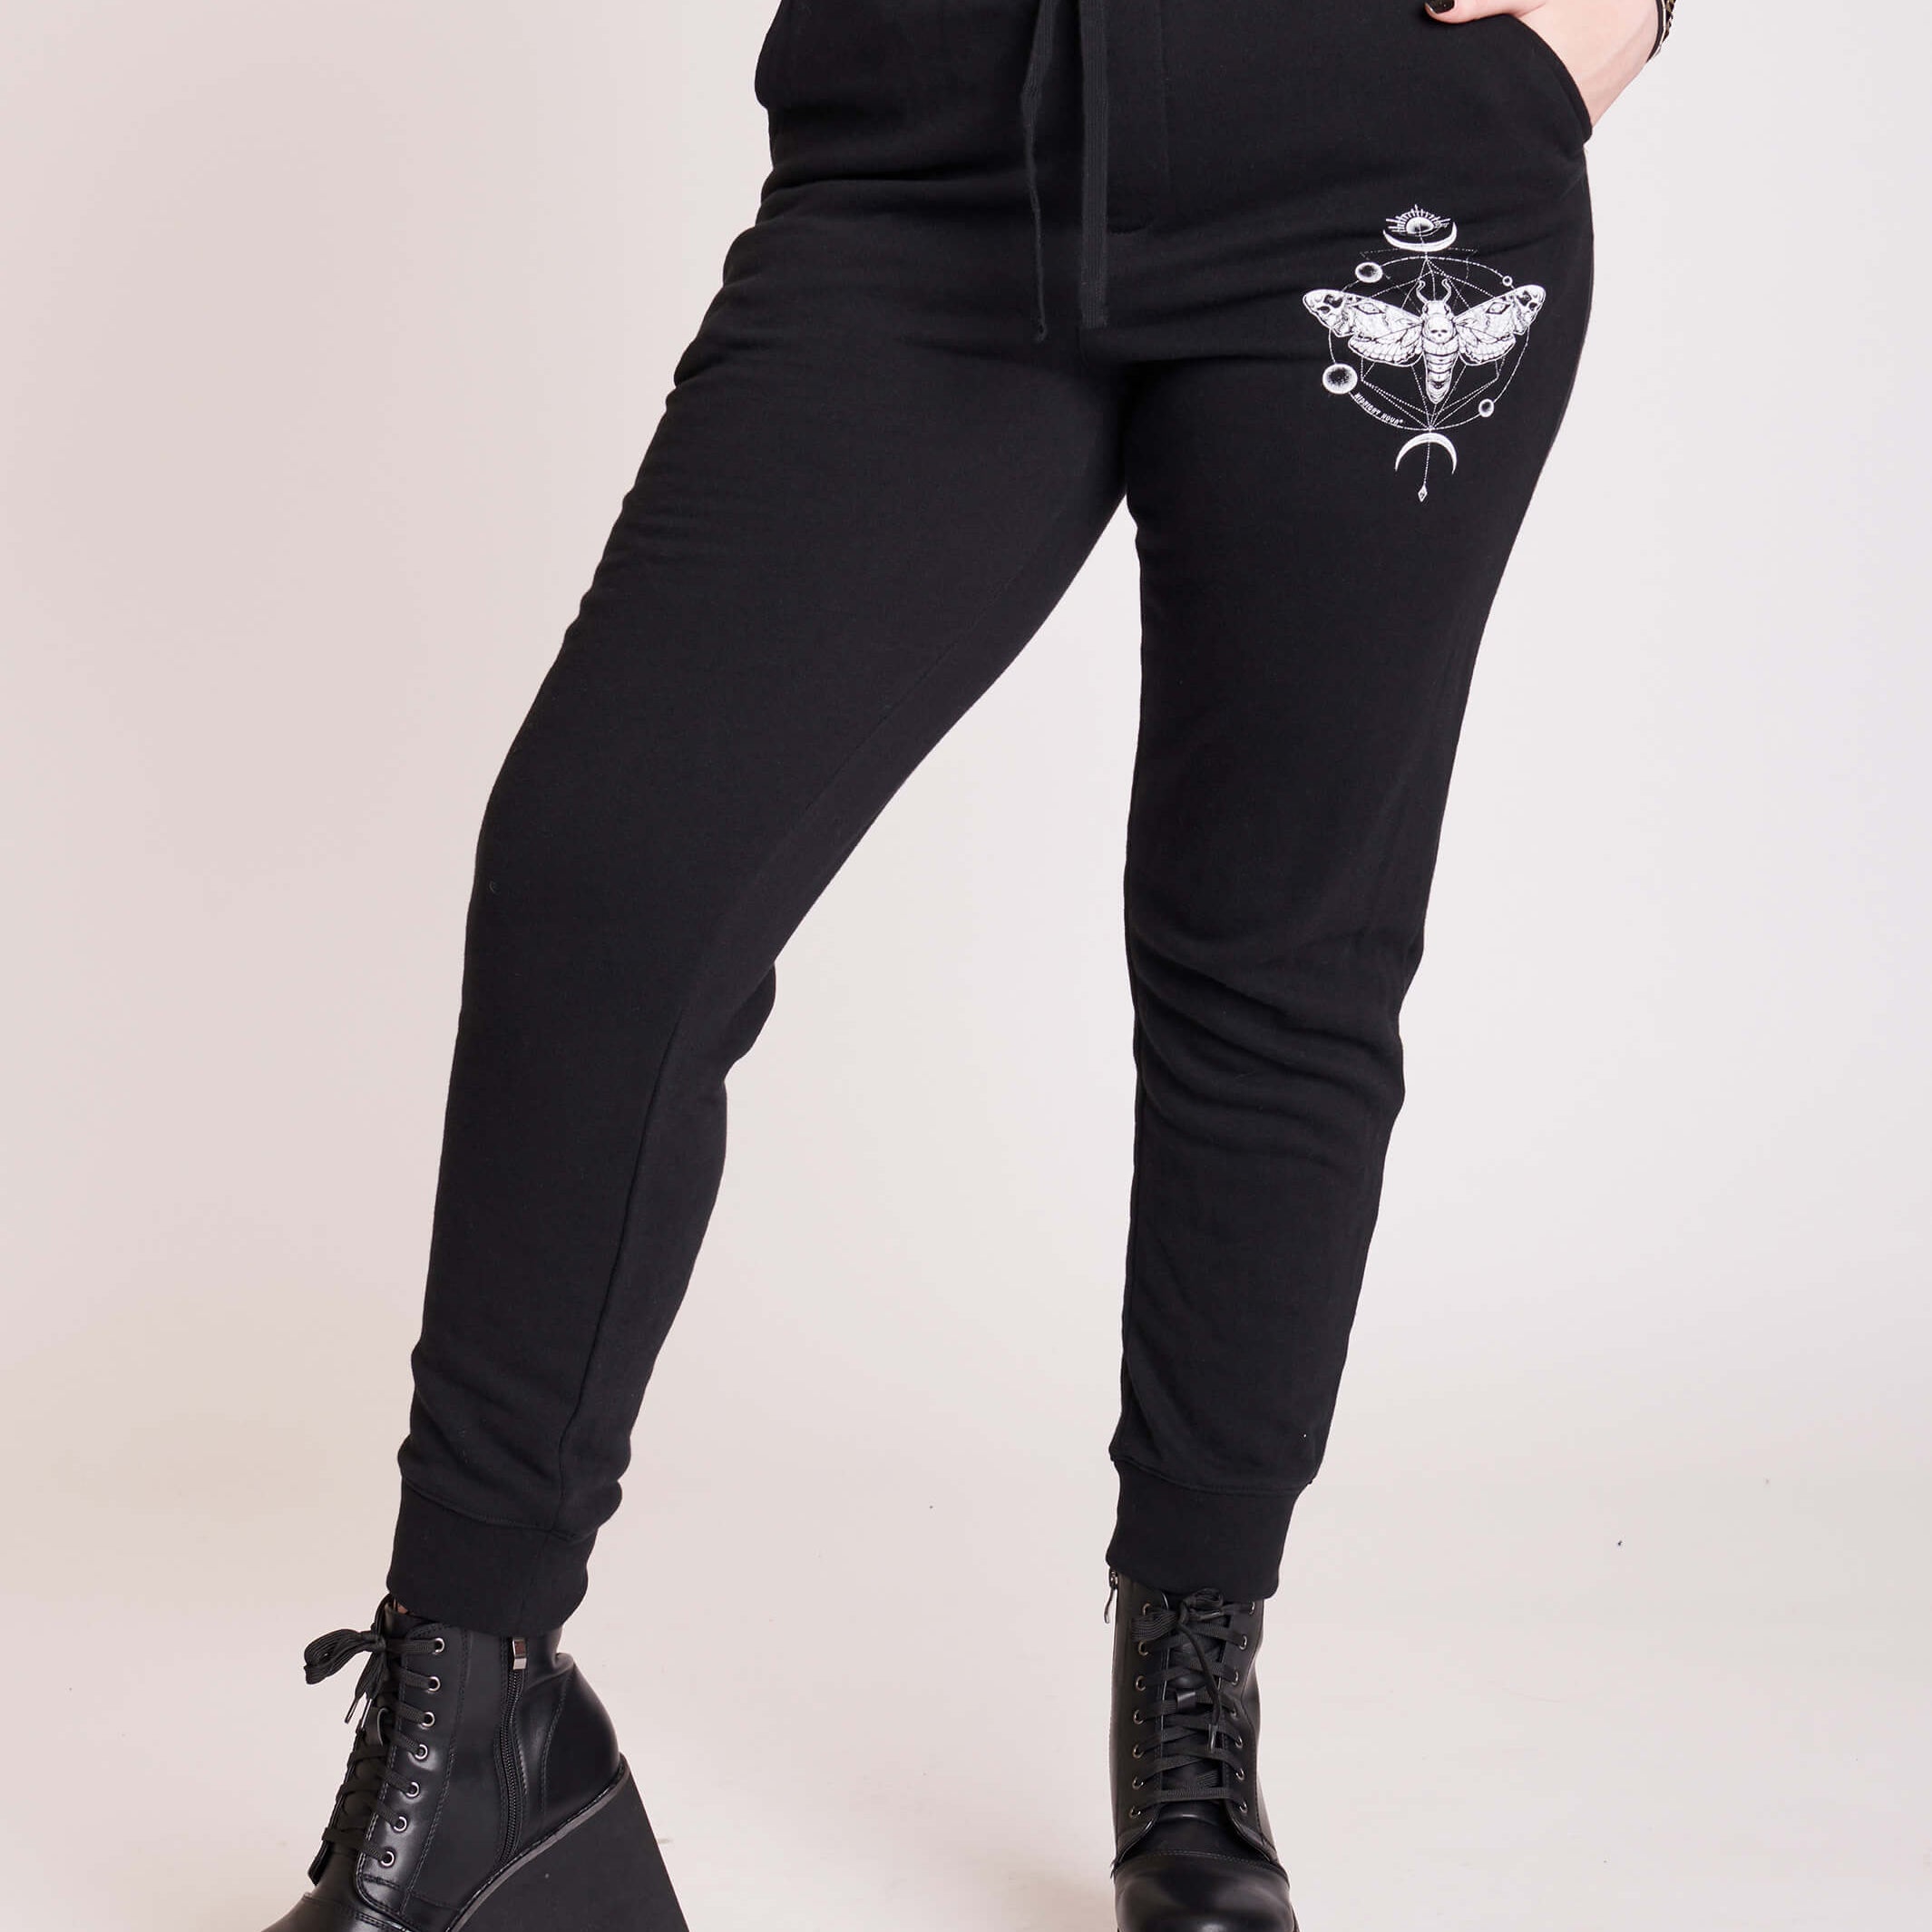 Unisex black jogger with deathmoth graphic